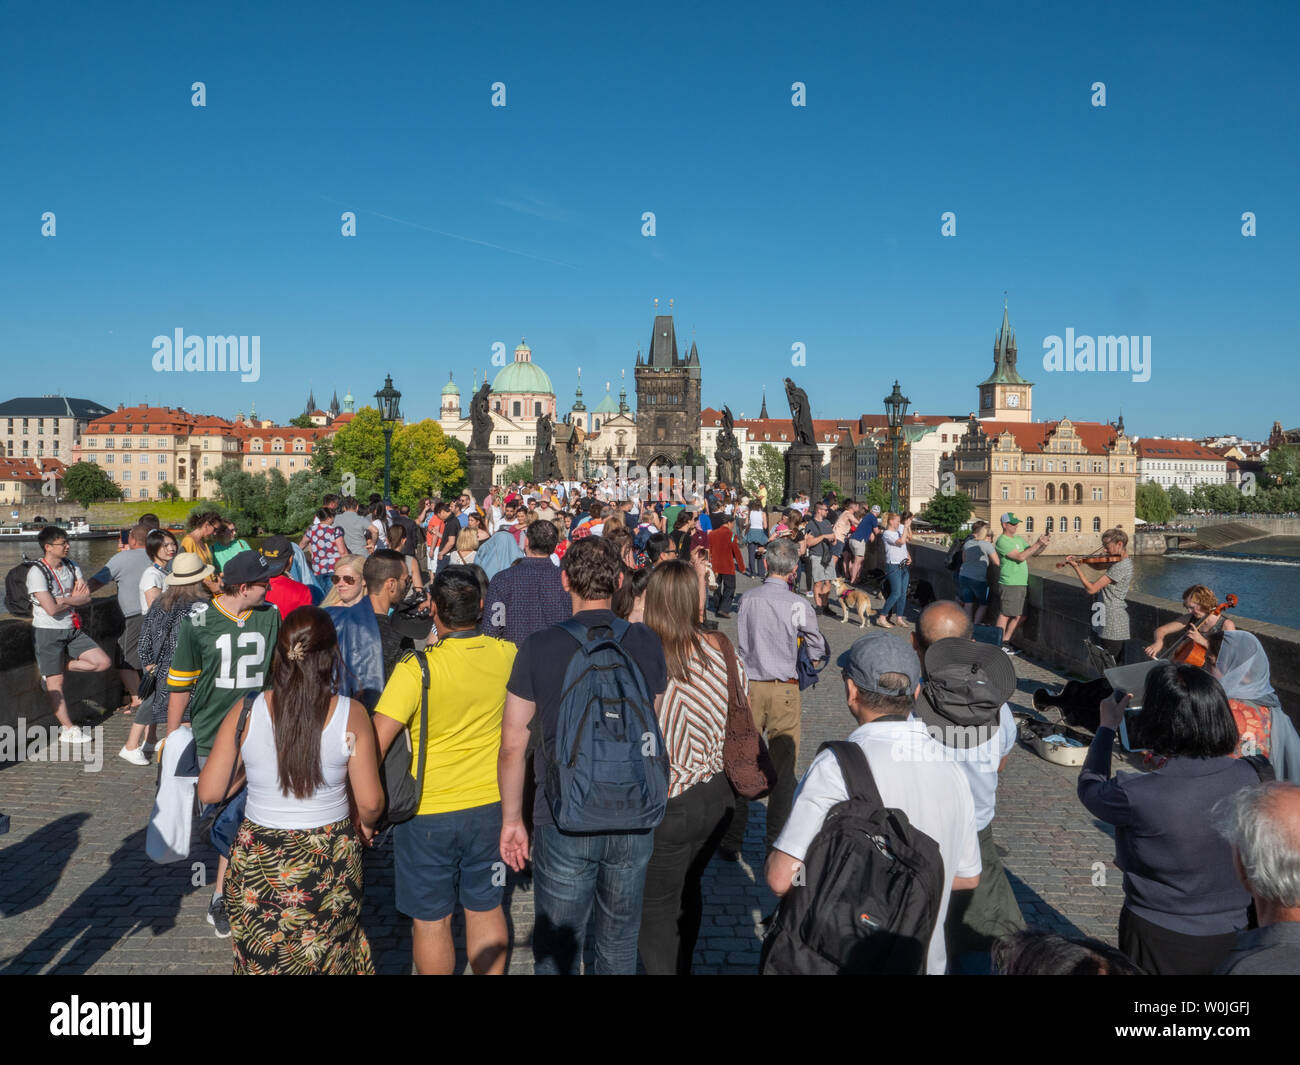 Prague, Czech Republic - June 8 2019: Tourist Masses and Crowds on Charles Bridge on the River Vltava on a hot summer day. A Concept for Mass Tourism. Stock Photo